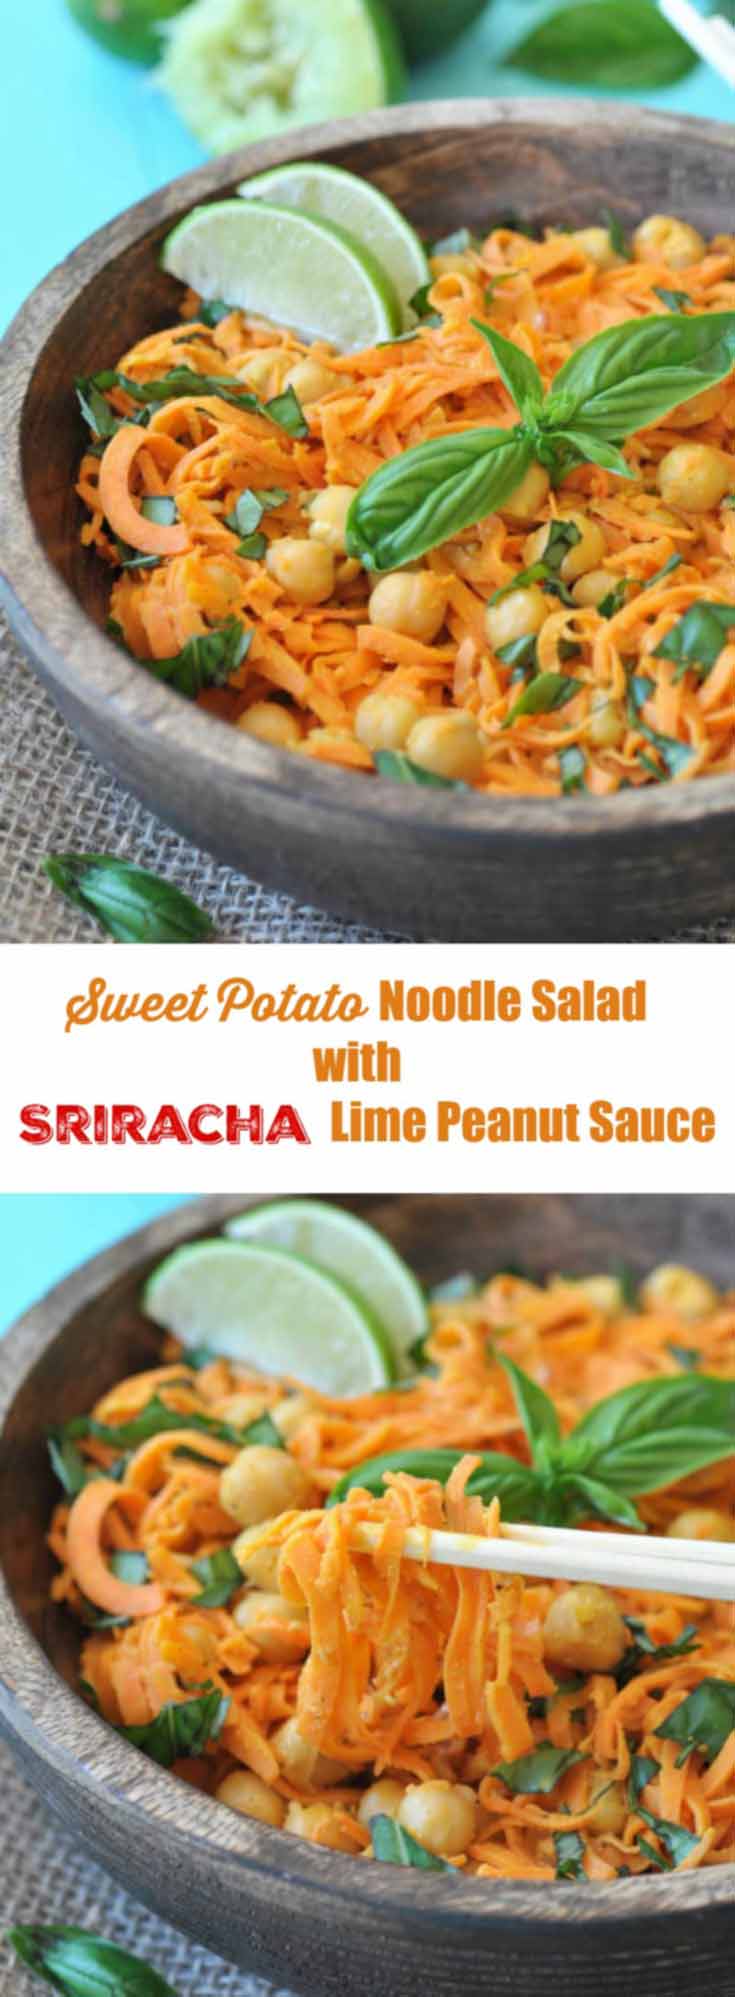 A Pinterest pin for spiralized sweet potato salad with sriracha lime peanut sauce with 2 pictures of the salad in a wooden bowl.